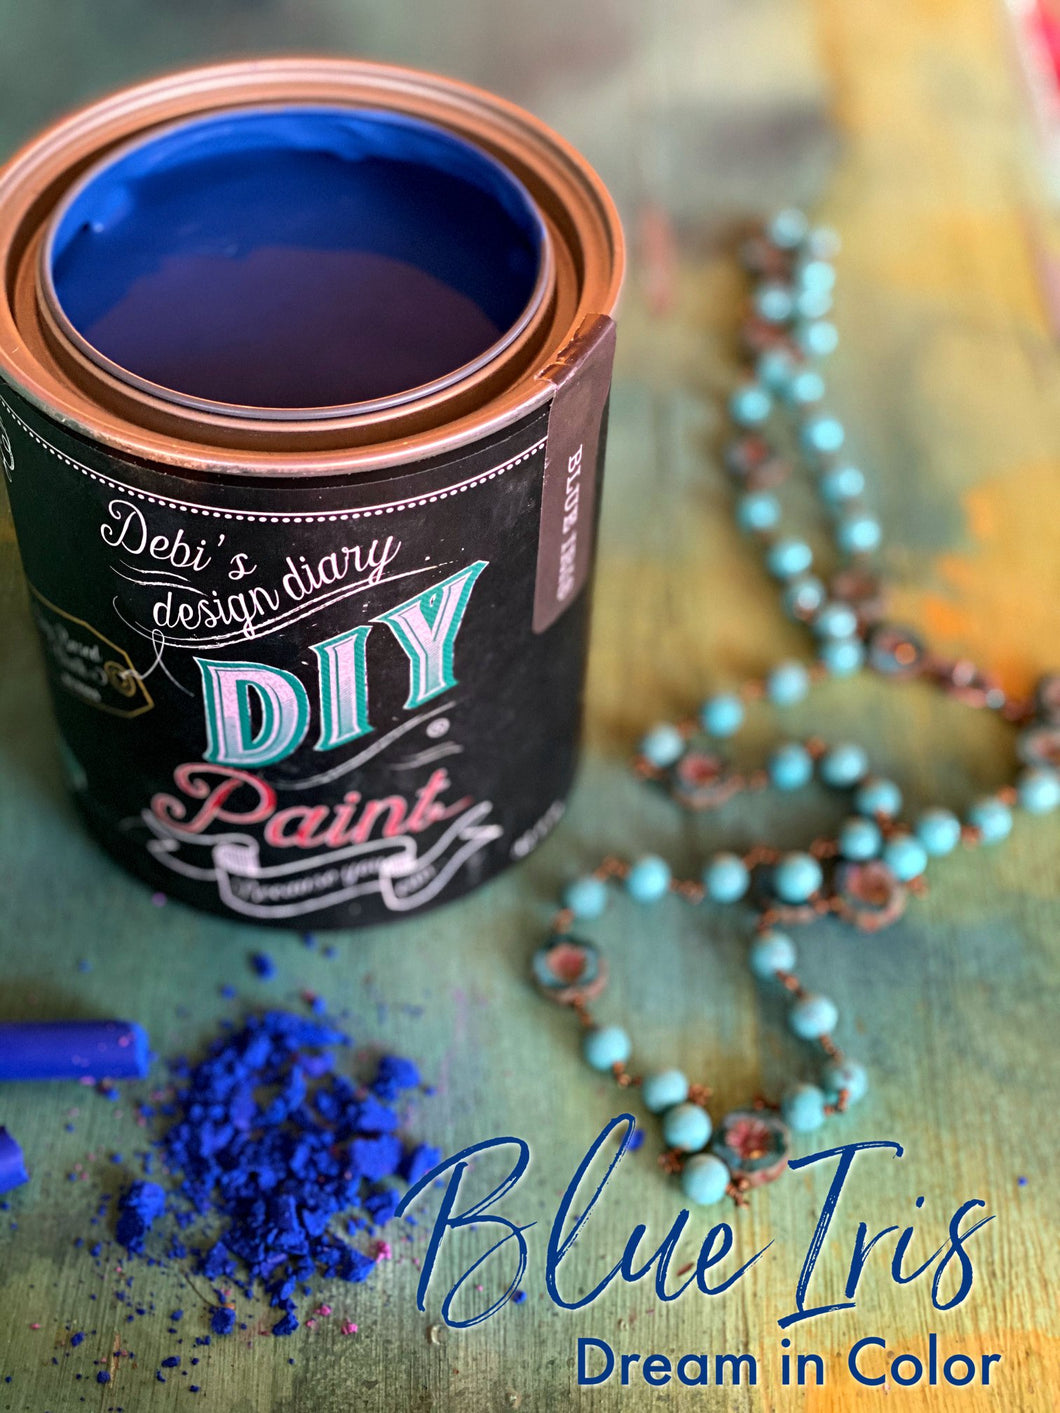 Blue Iris - Debi's DIY Paint ™ Clay Based Furniture and Craft Paint in Bright Blue